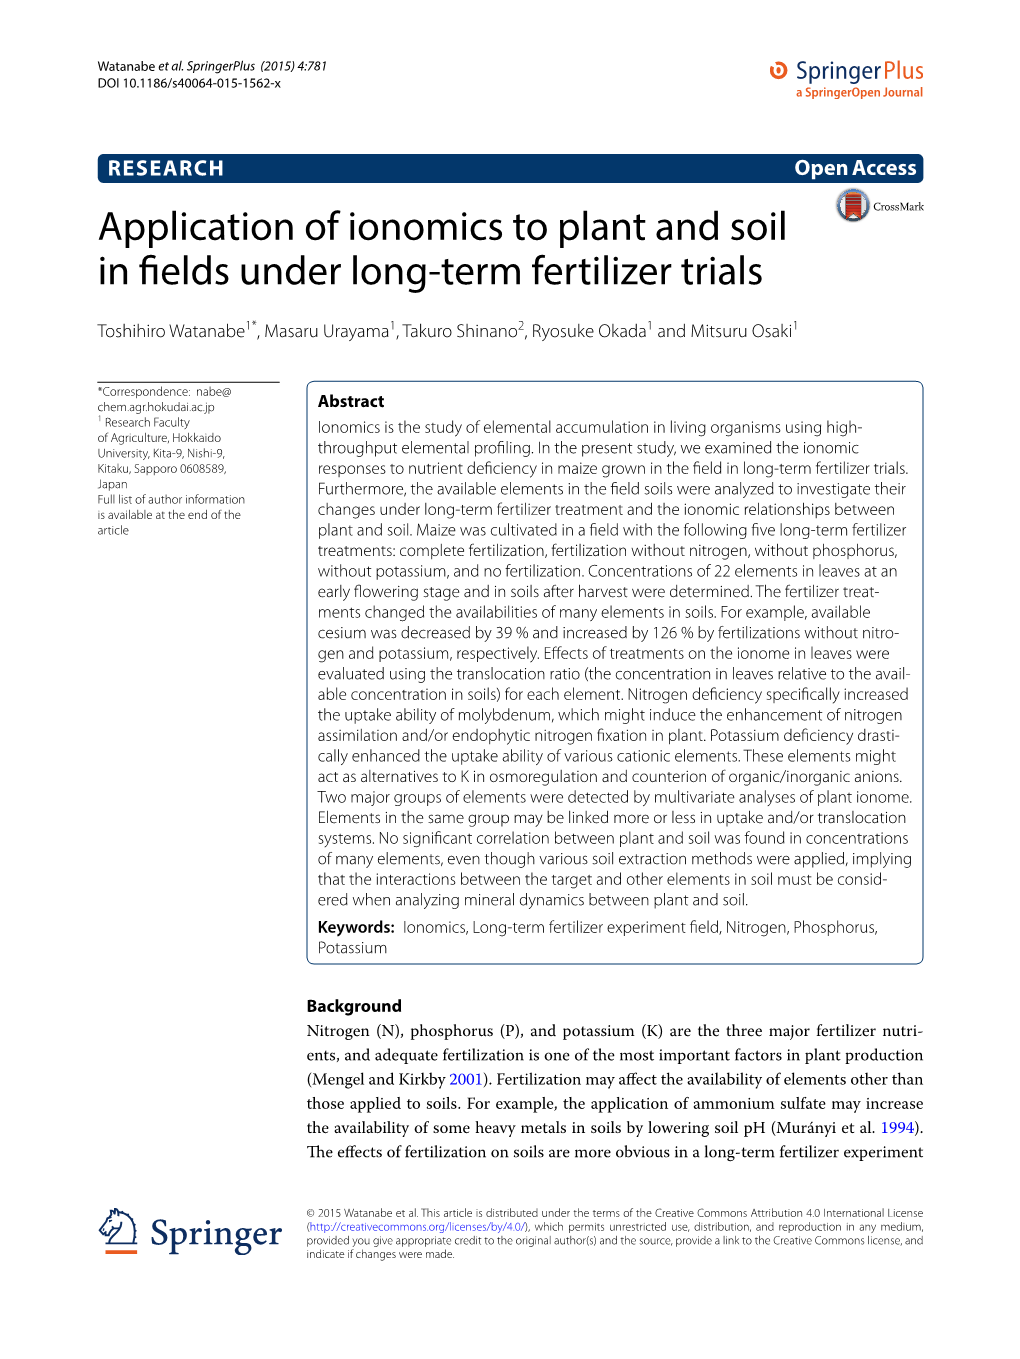 Application of Ionomics to Plant and Soil in Fields Under Long-Term